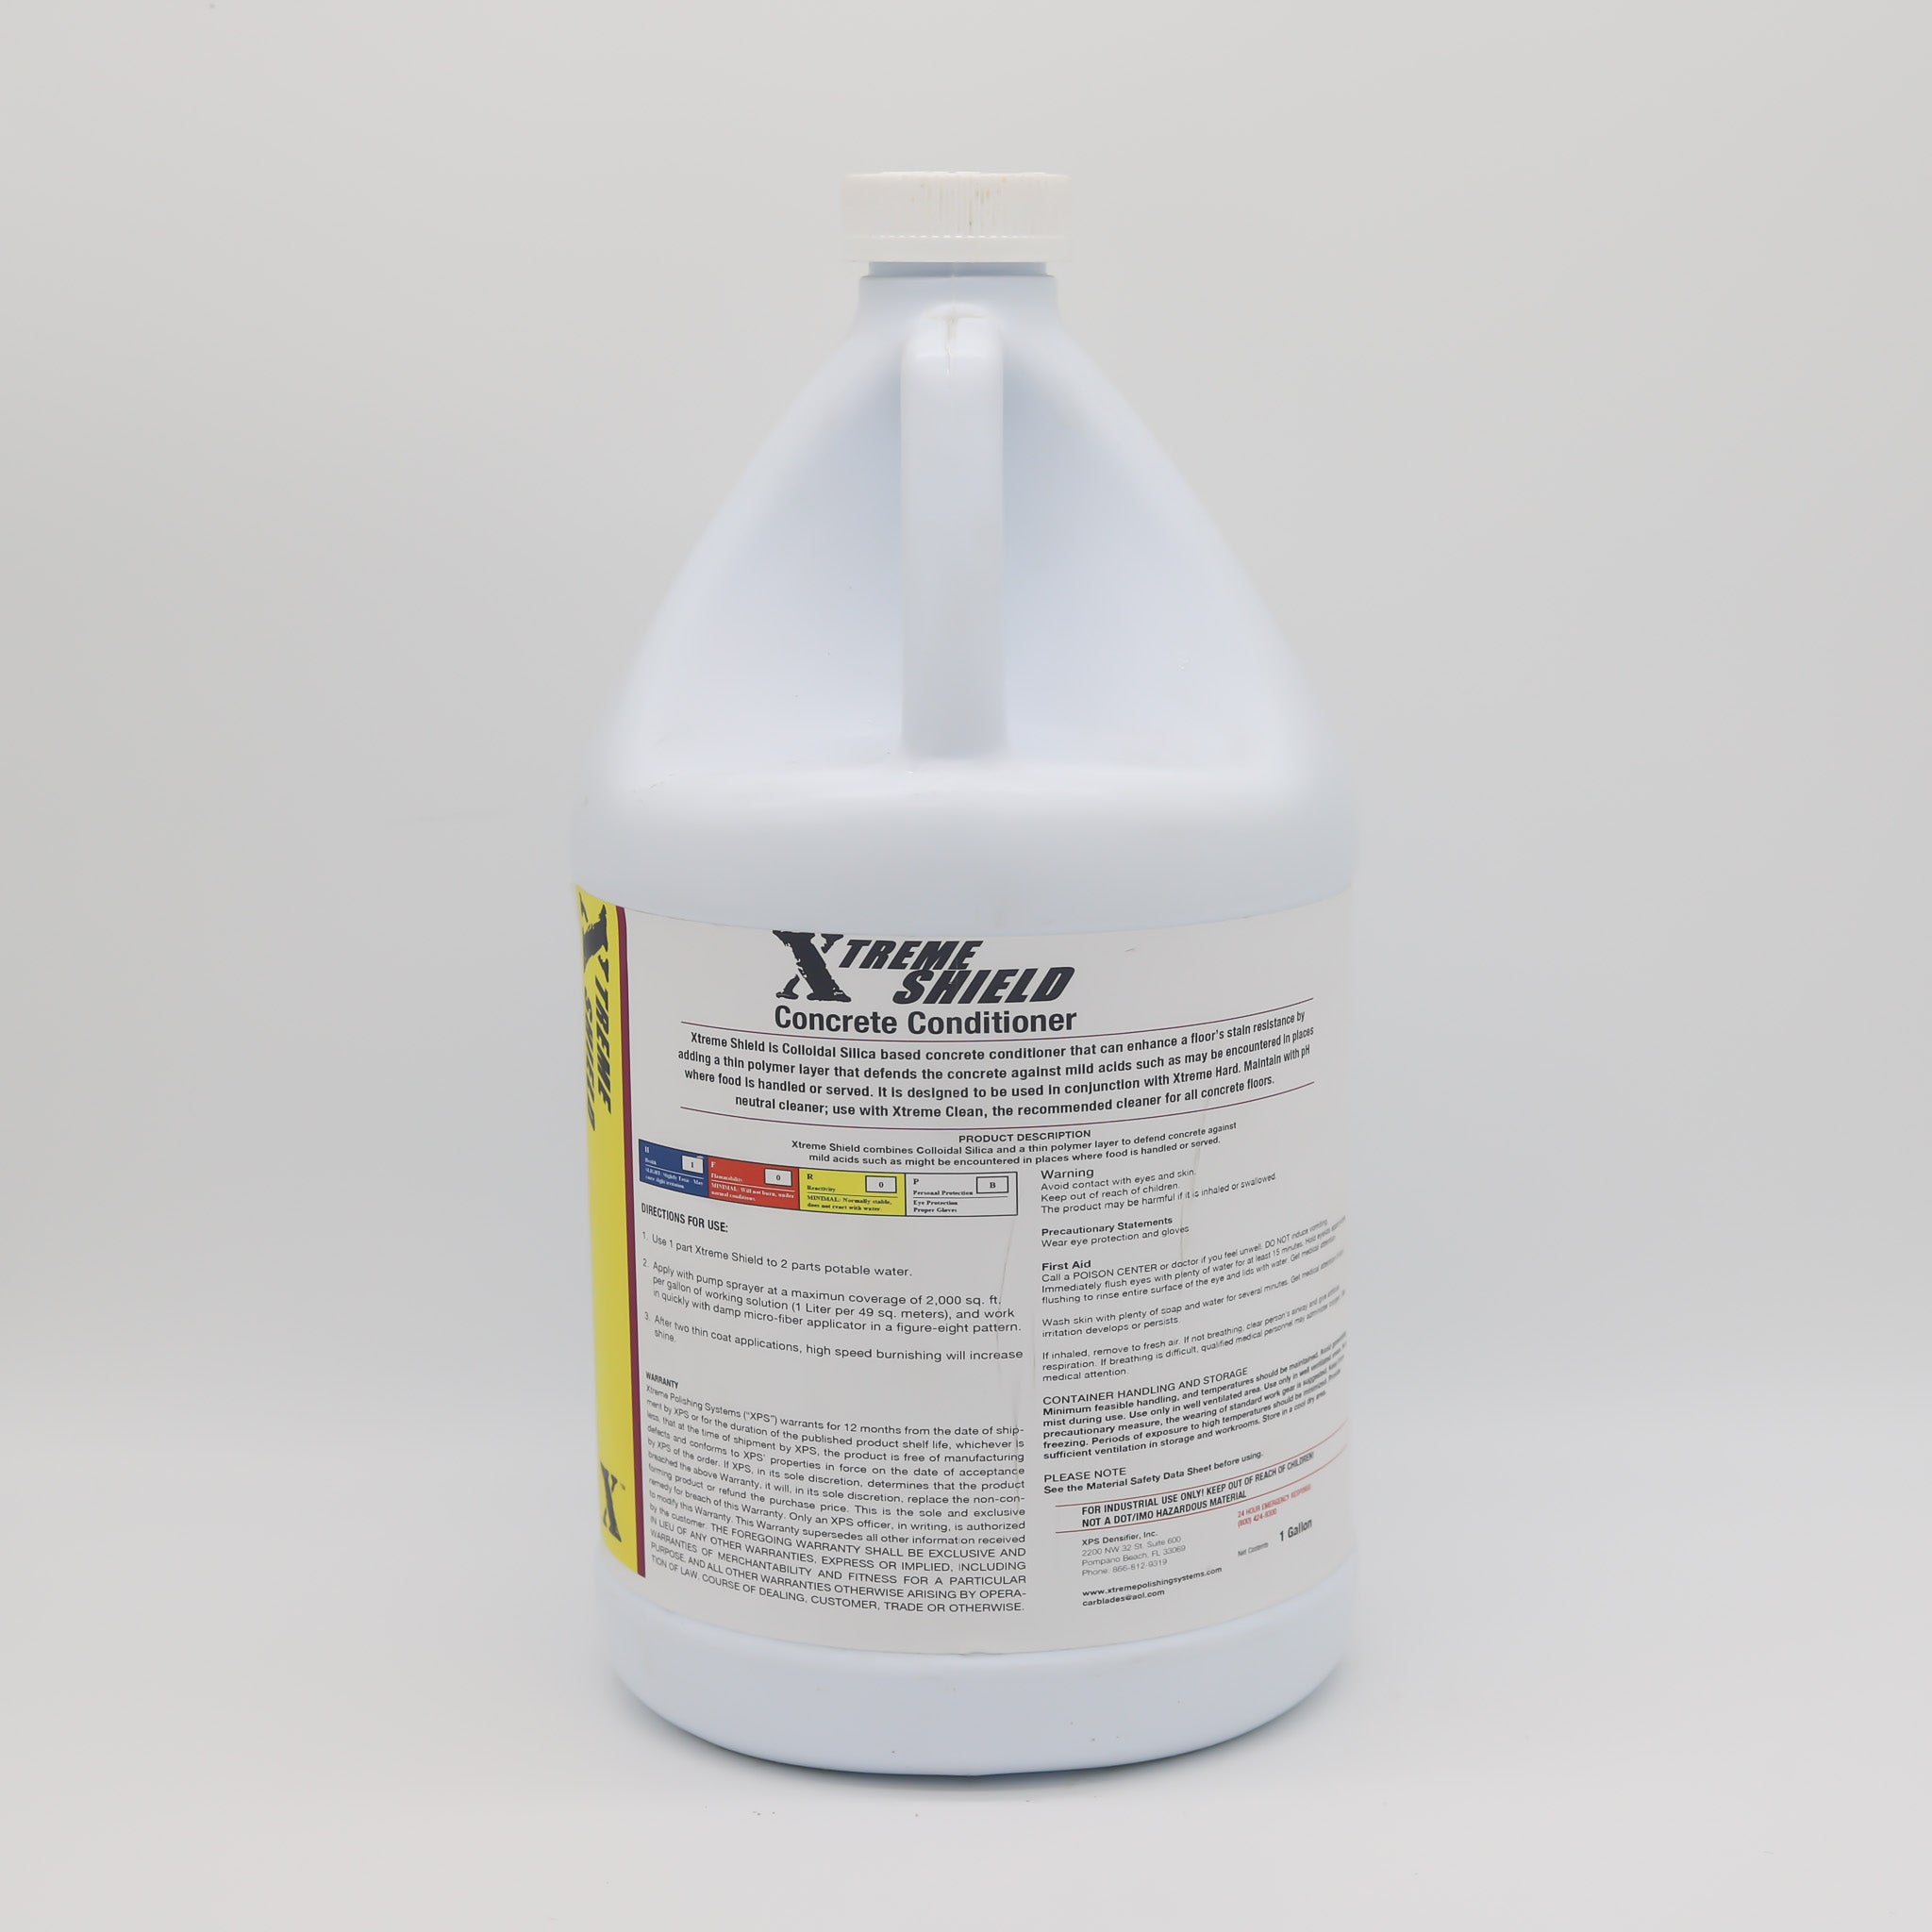 Xtreme Shield Concrete Conditioner (Polished Concrete Sealer) - Freight Only